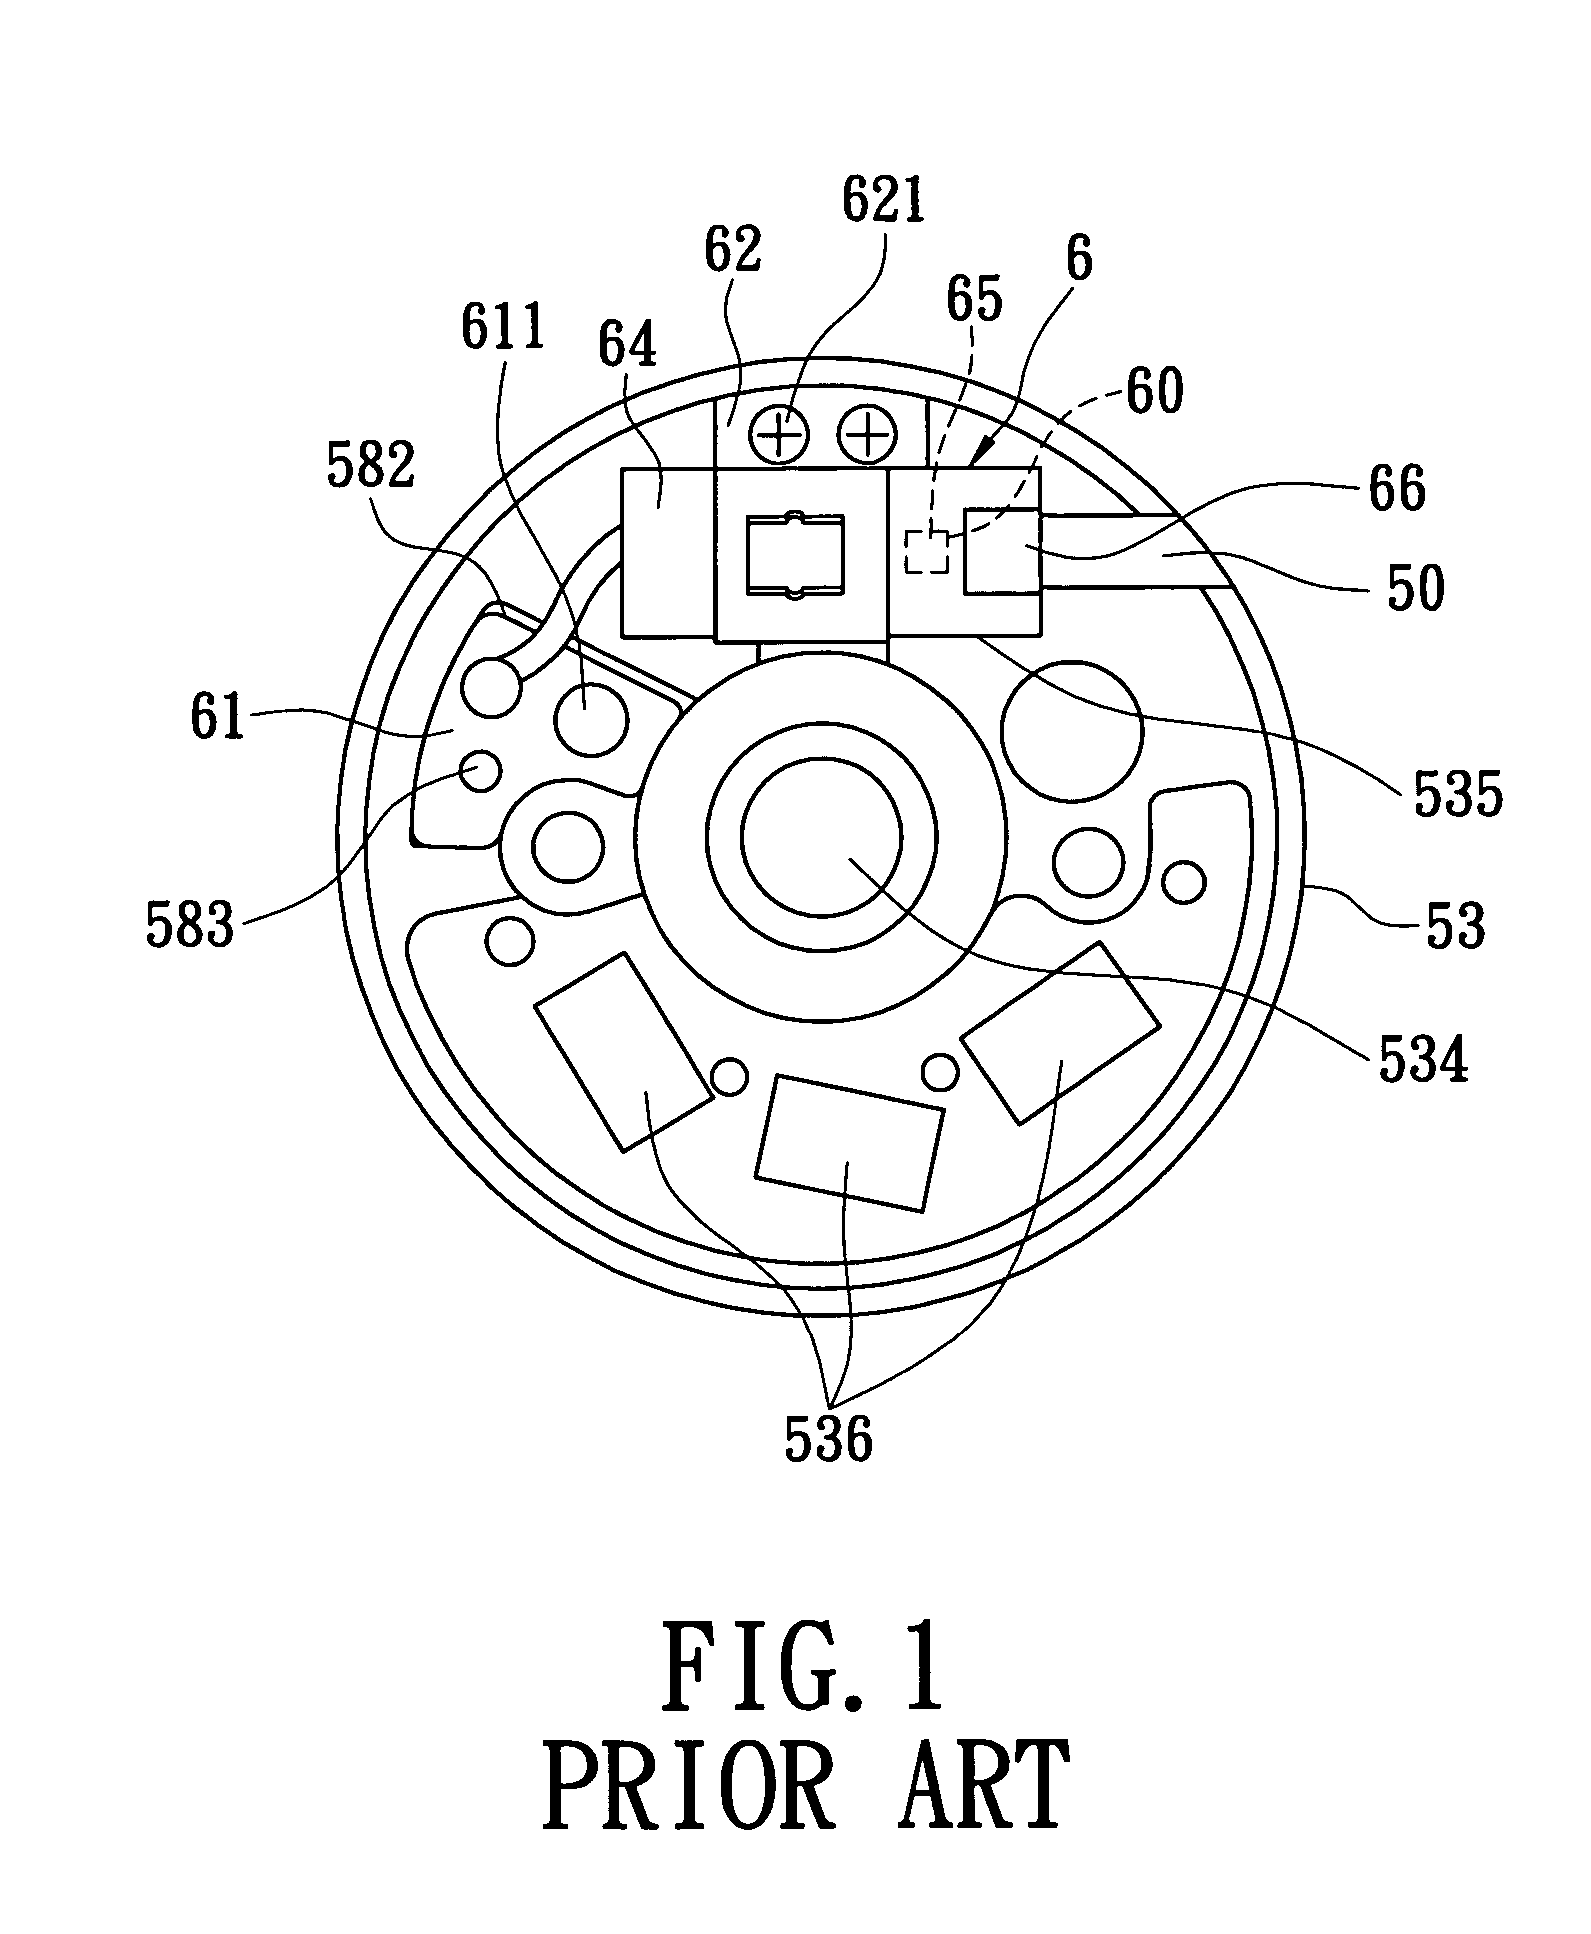 Laser alignment device of a circular saw machine